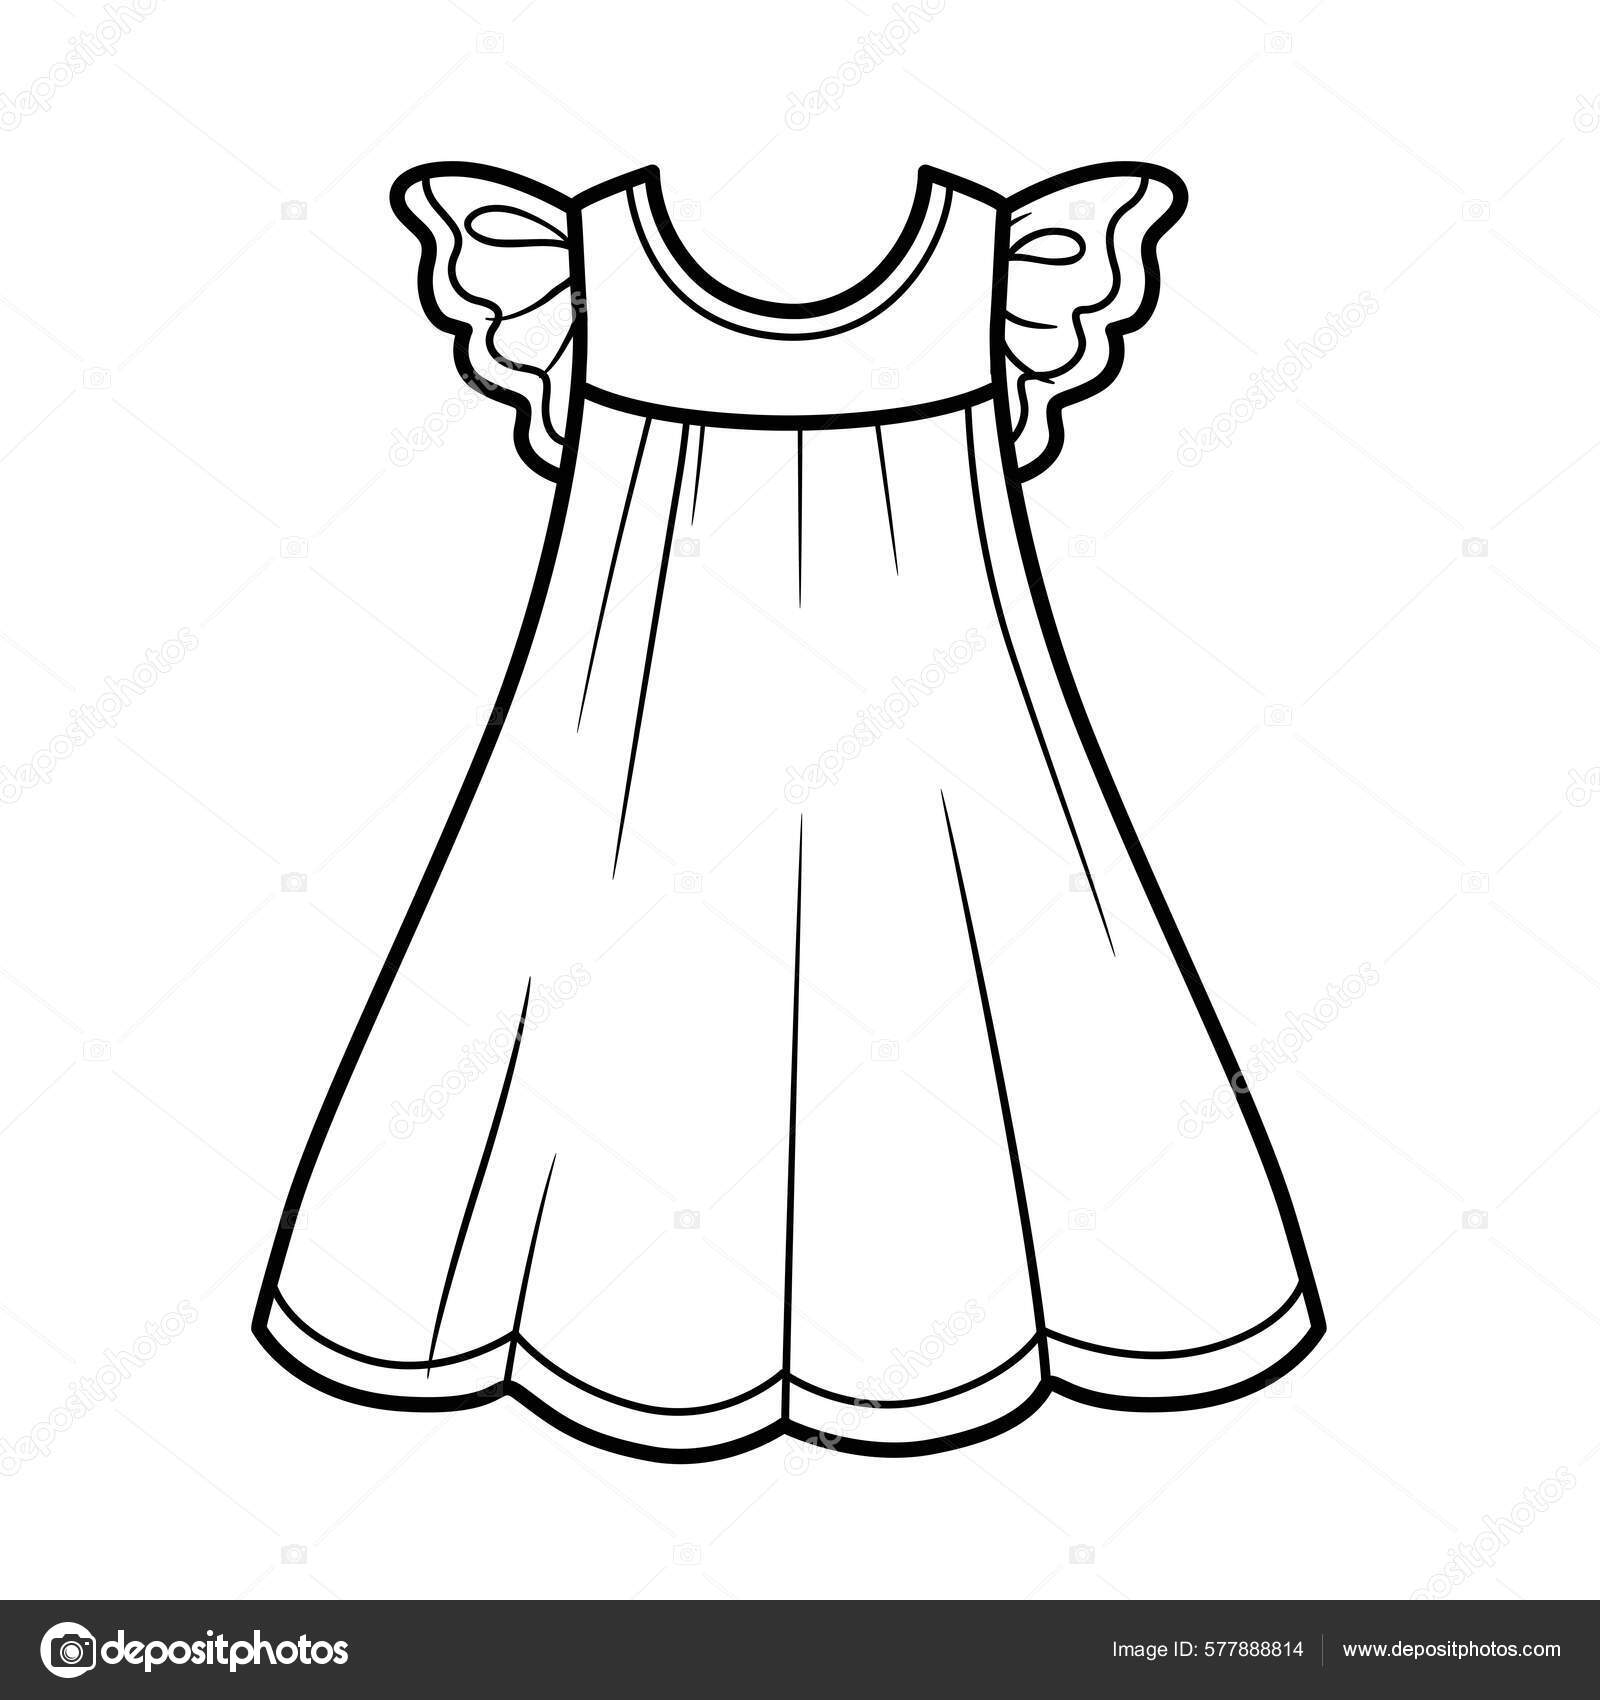 Women's dresses. Hand drawn vector illustration. Black outline drawing  isolat: Royalty Free #144211330